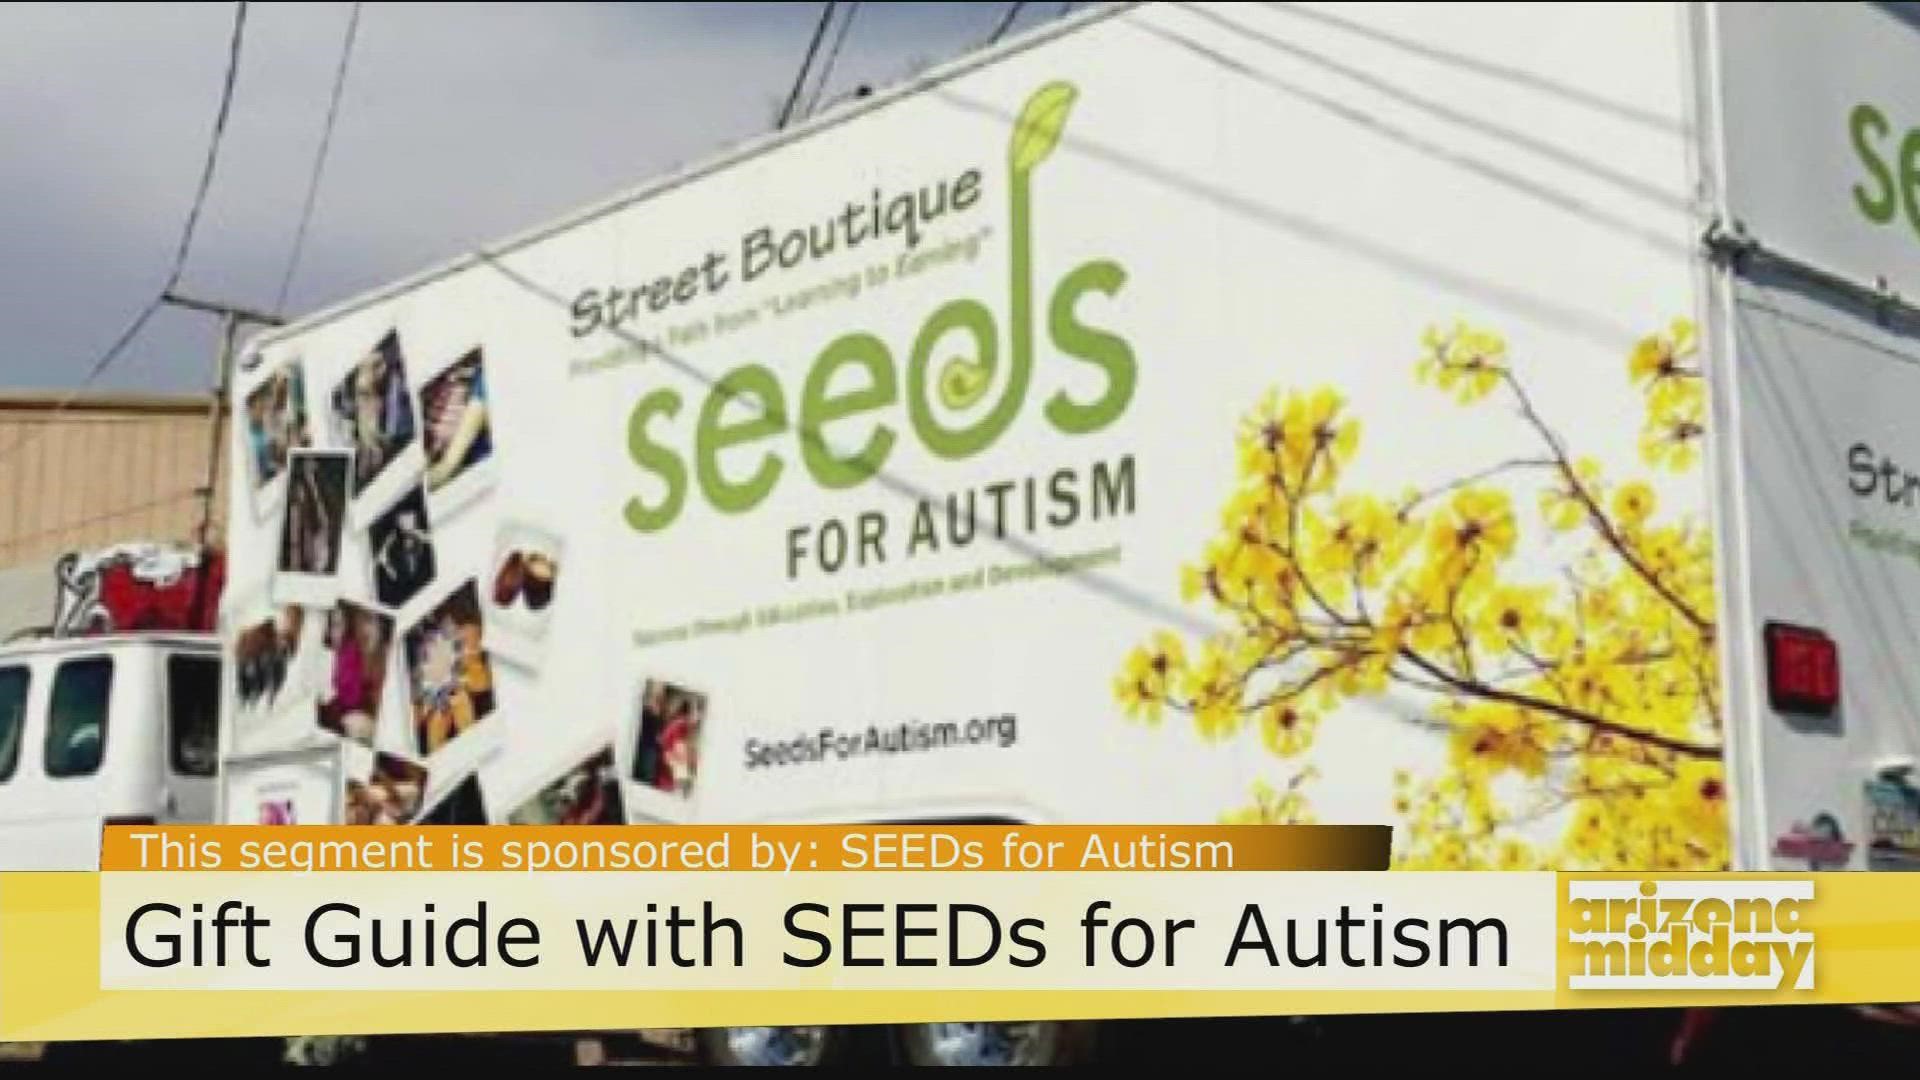 Mary Anne Laroche shares how Seeds for Autism has a mobile boutique that sells students works and shares how they are helping our community.